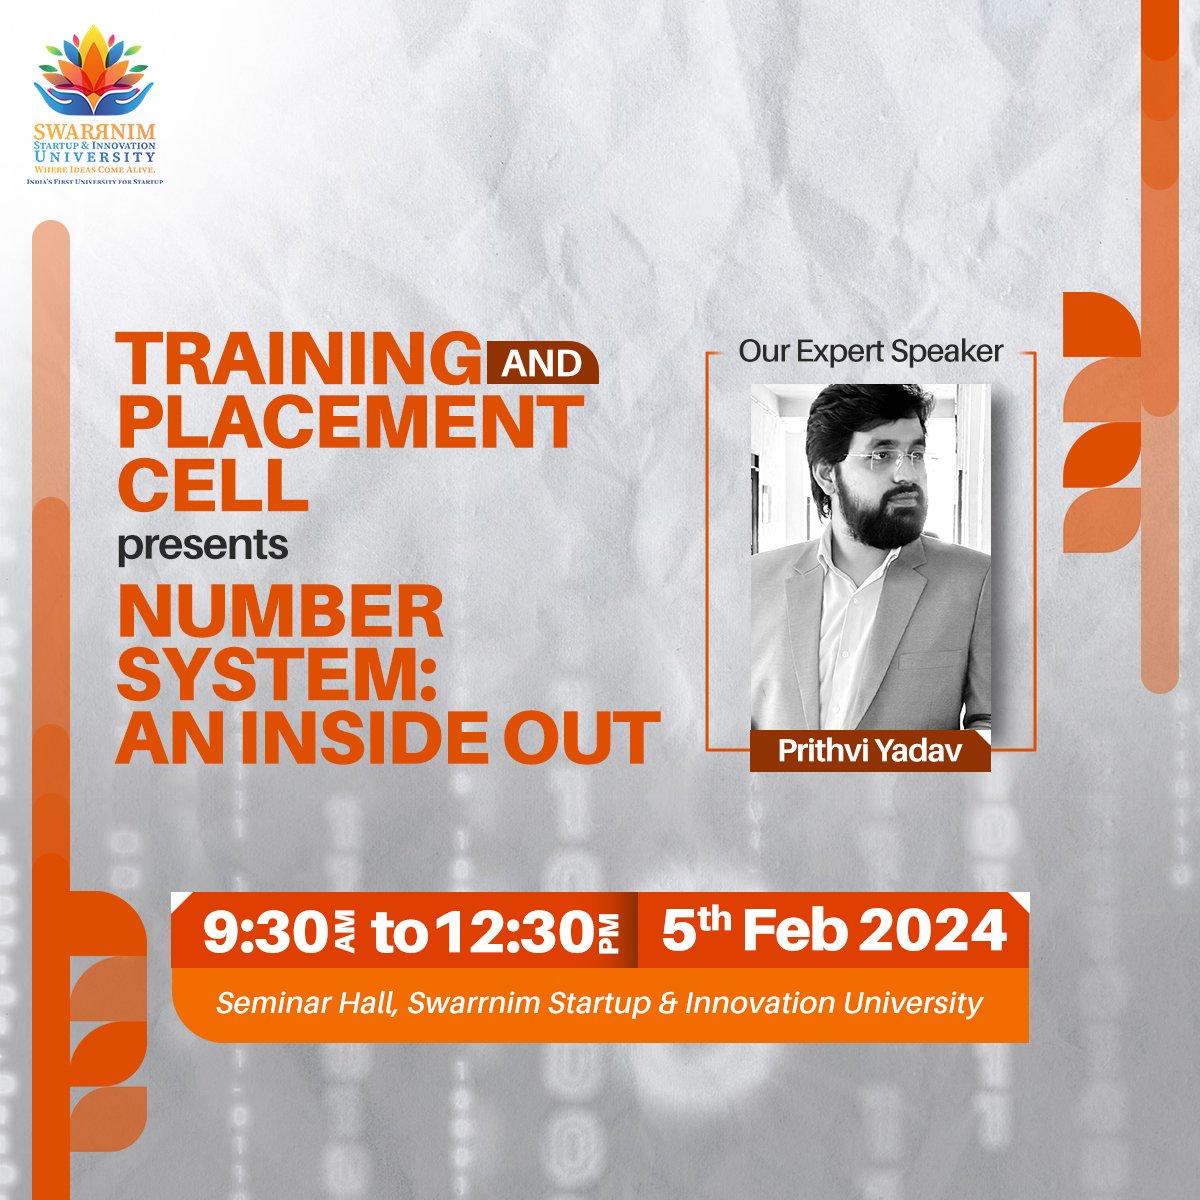 Dive deep into the world of numbers!

Join us for an insightful session on the 'Number System' with our expert speaker, Prithvi Yadav. 
.
.
.
#Swarrnim #SwarrnimUniversity  #EducationalSeminar #UniversityStudents #PlacementReady #ExpertTalks #CampusLife #MathLovers #MathWorkshop